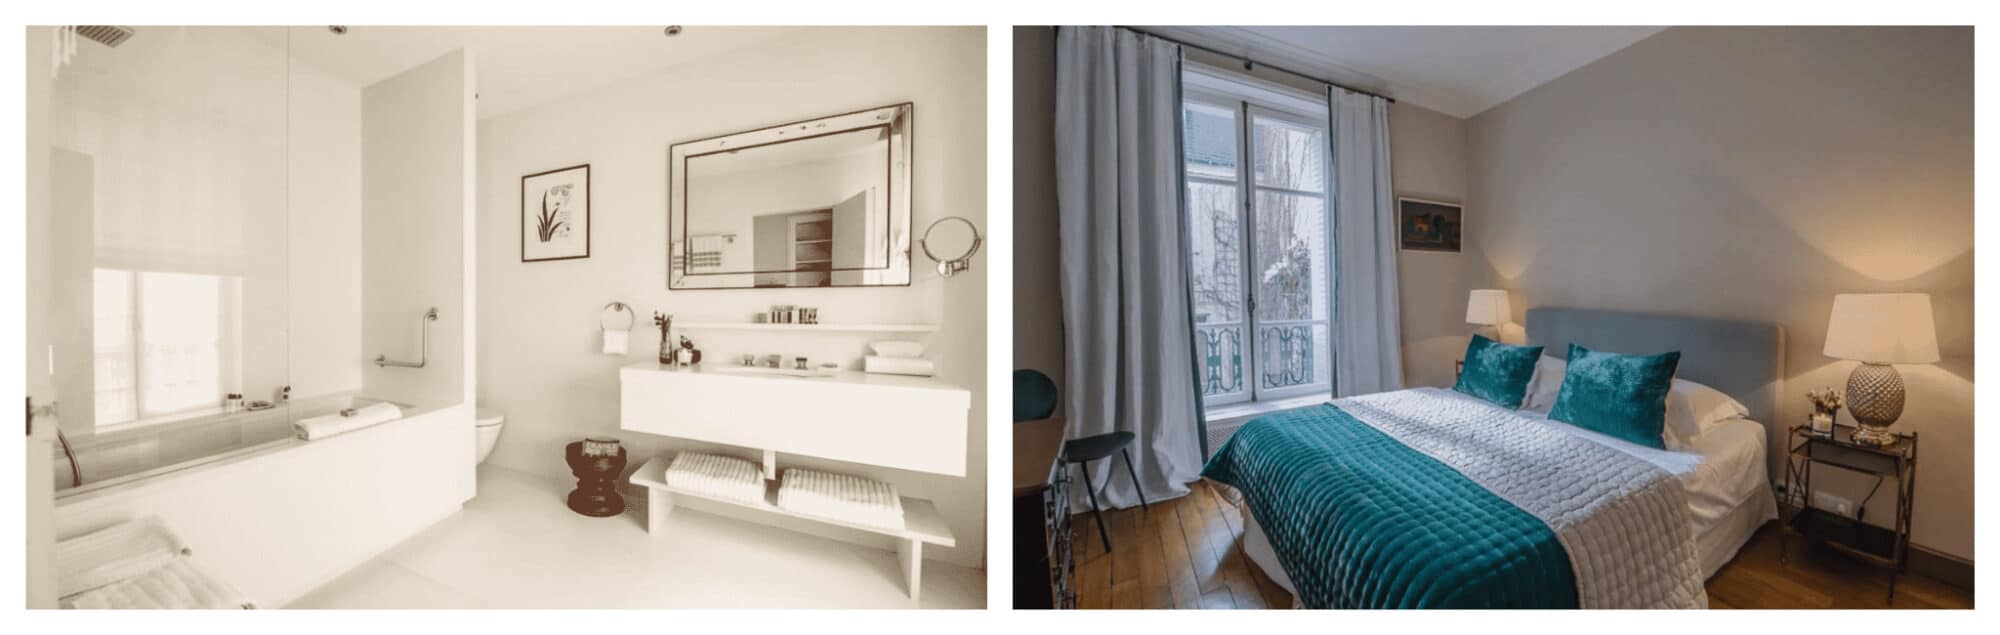 Left: The bathroom of a Paris apartment made of clean white materials; right: the bedroom of Paris apartment with a king sized bed made up with turquoise and white bedding.